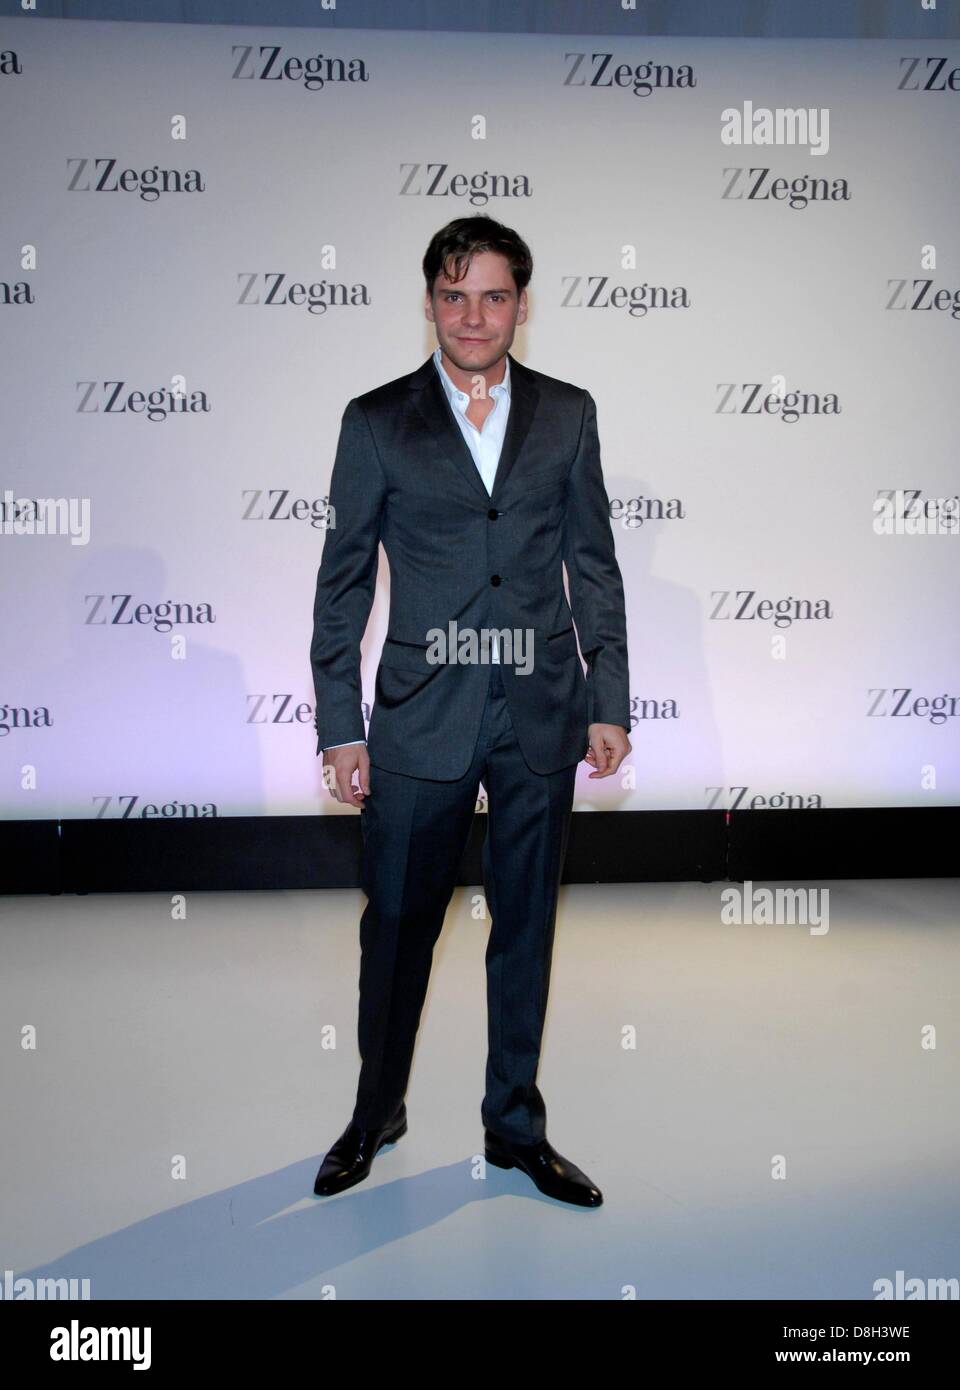 Daniel Bruehl at the presentation of the Zegna Collection S/S 2009 in Berlin. Stock Photo